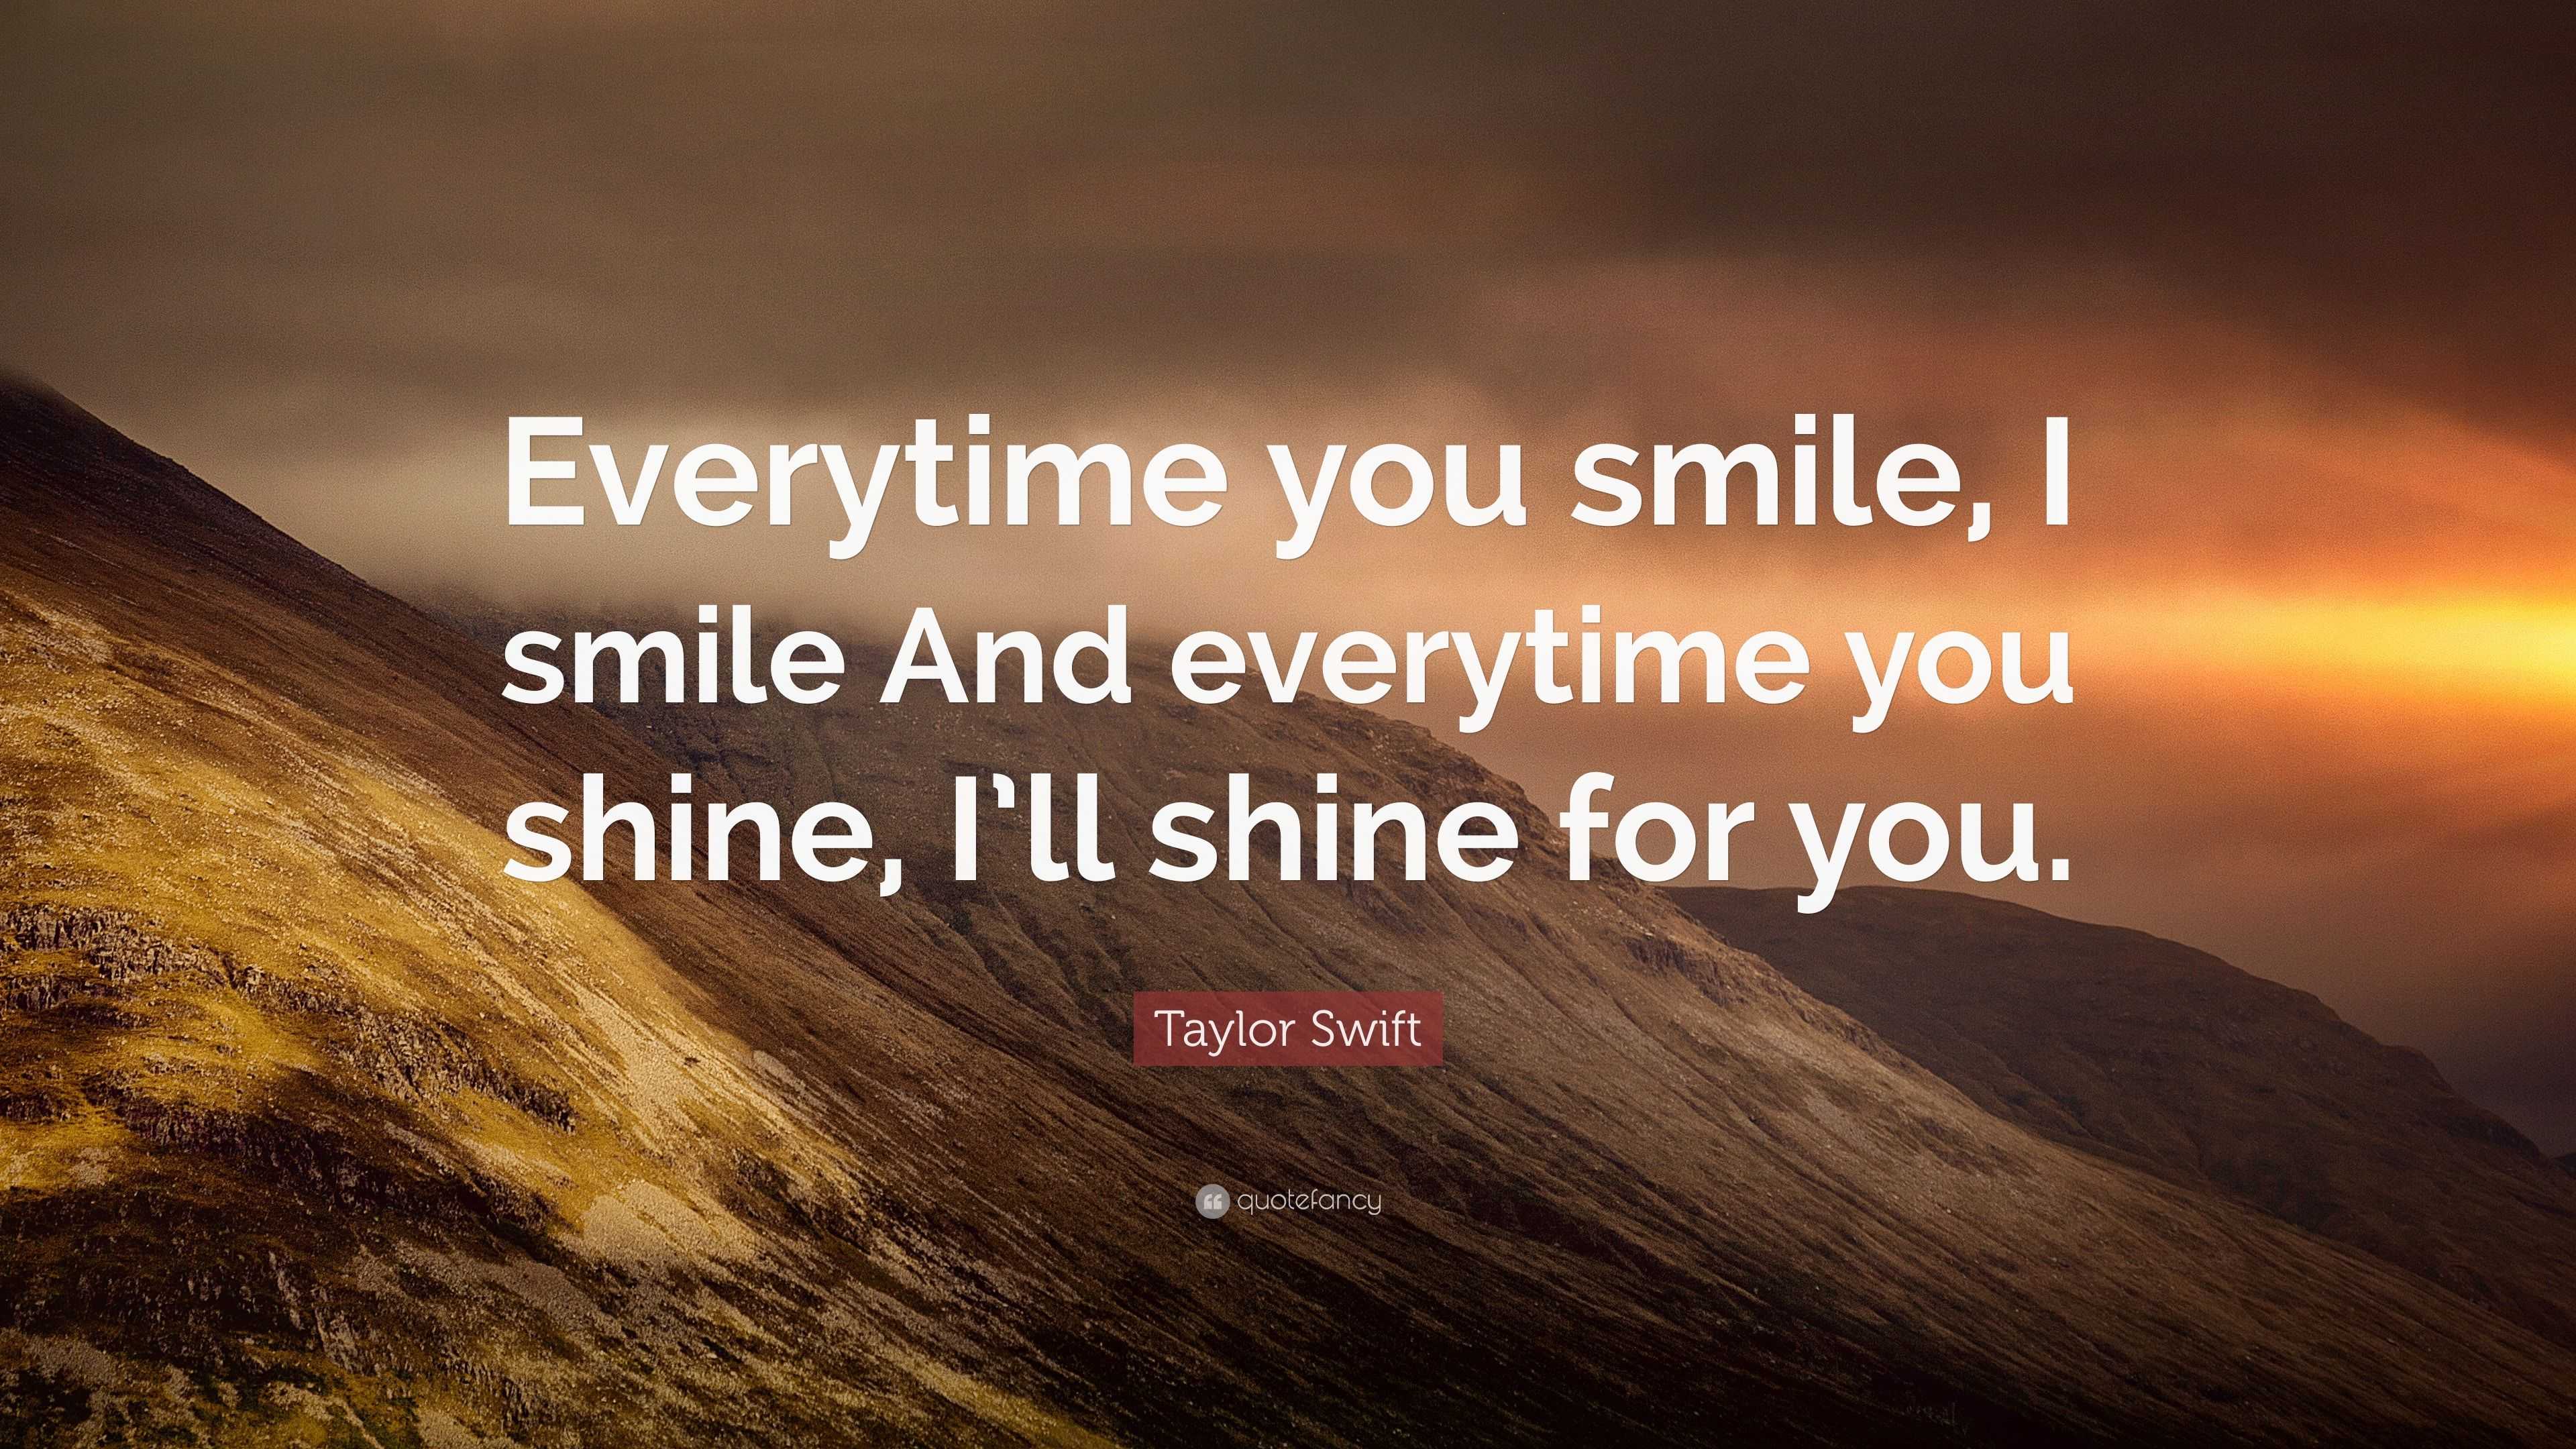 Taylor Swift Quote: “Everytime you smile, I smile And everytime you ...